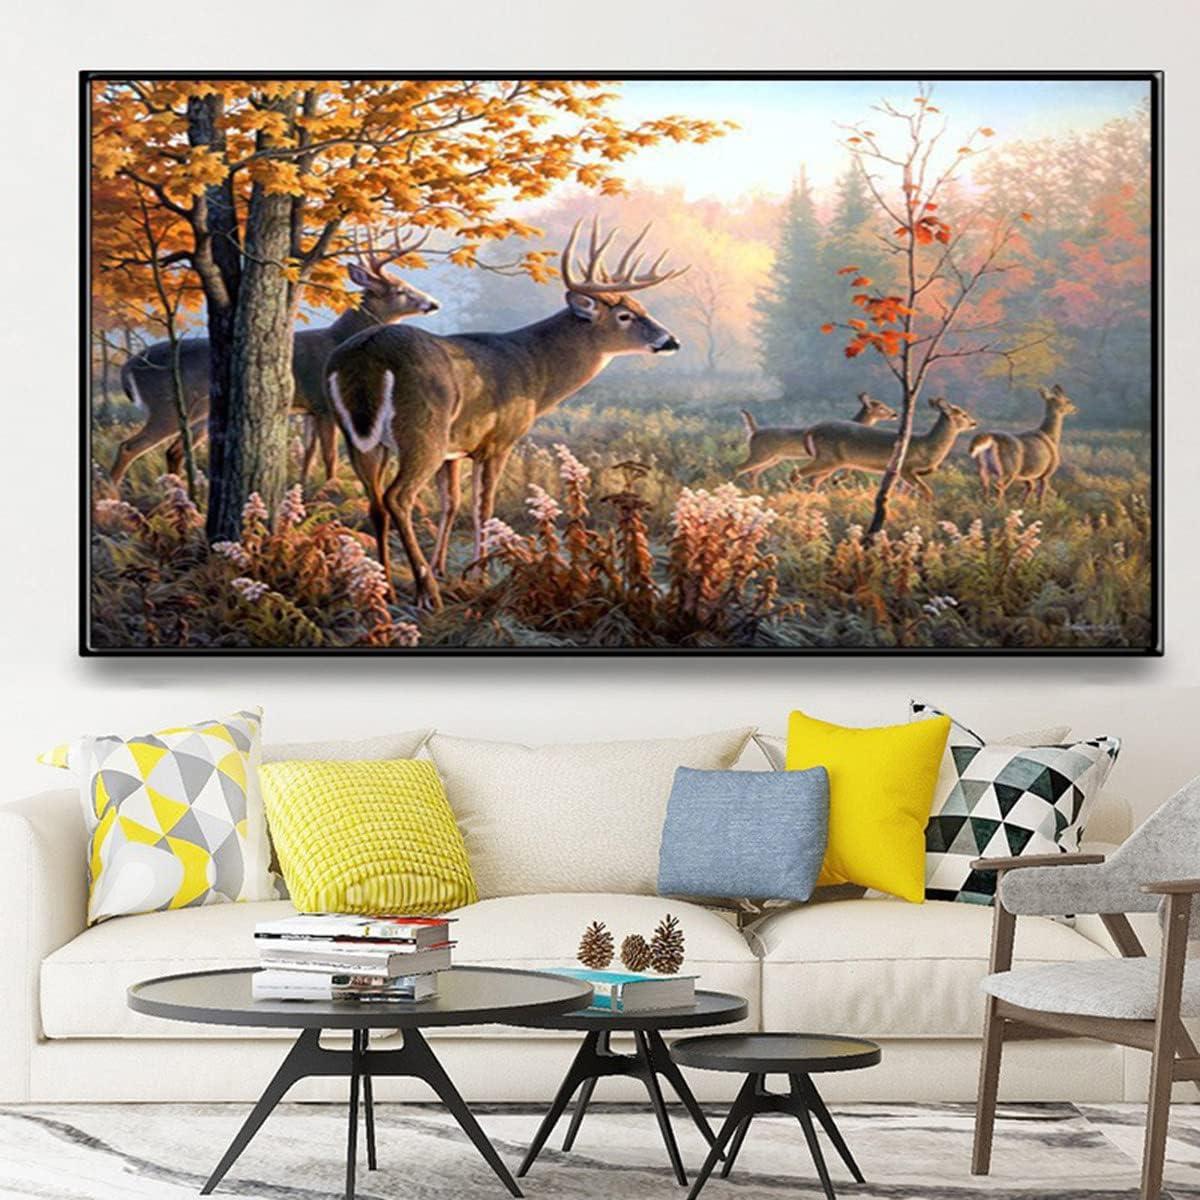 TISHIRON Diamond Painting Kits,12x16 inch 5D DIY Forest Deer Diamond Art  Crafts Kit for Home Wall Decor Gift